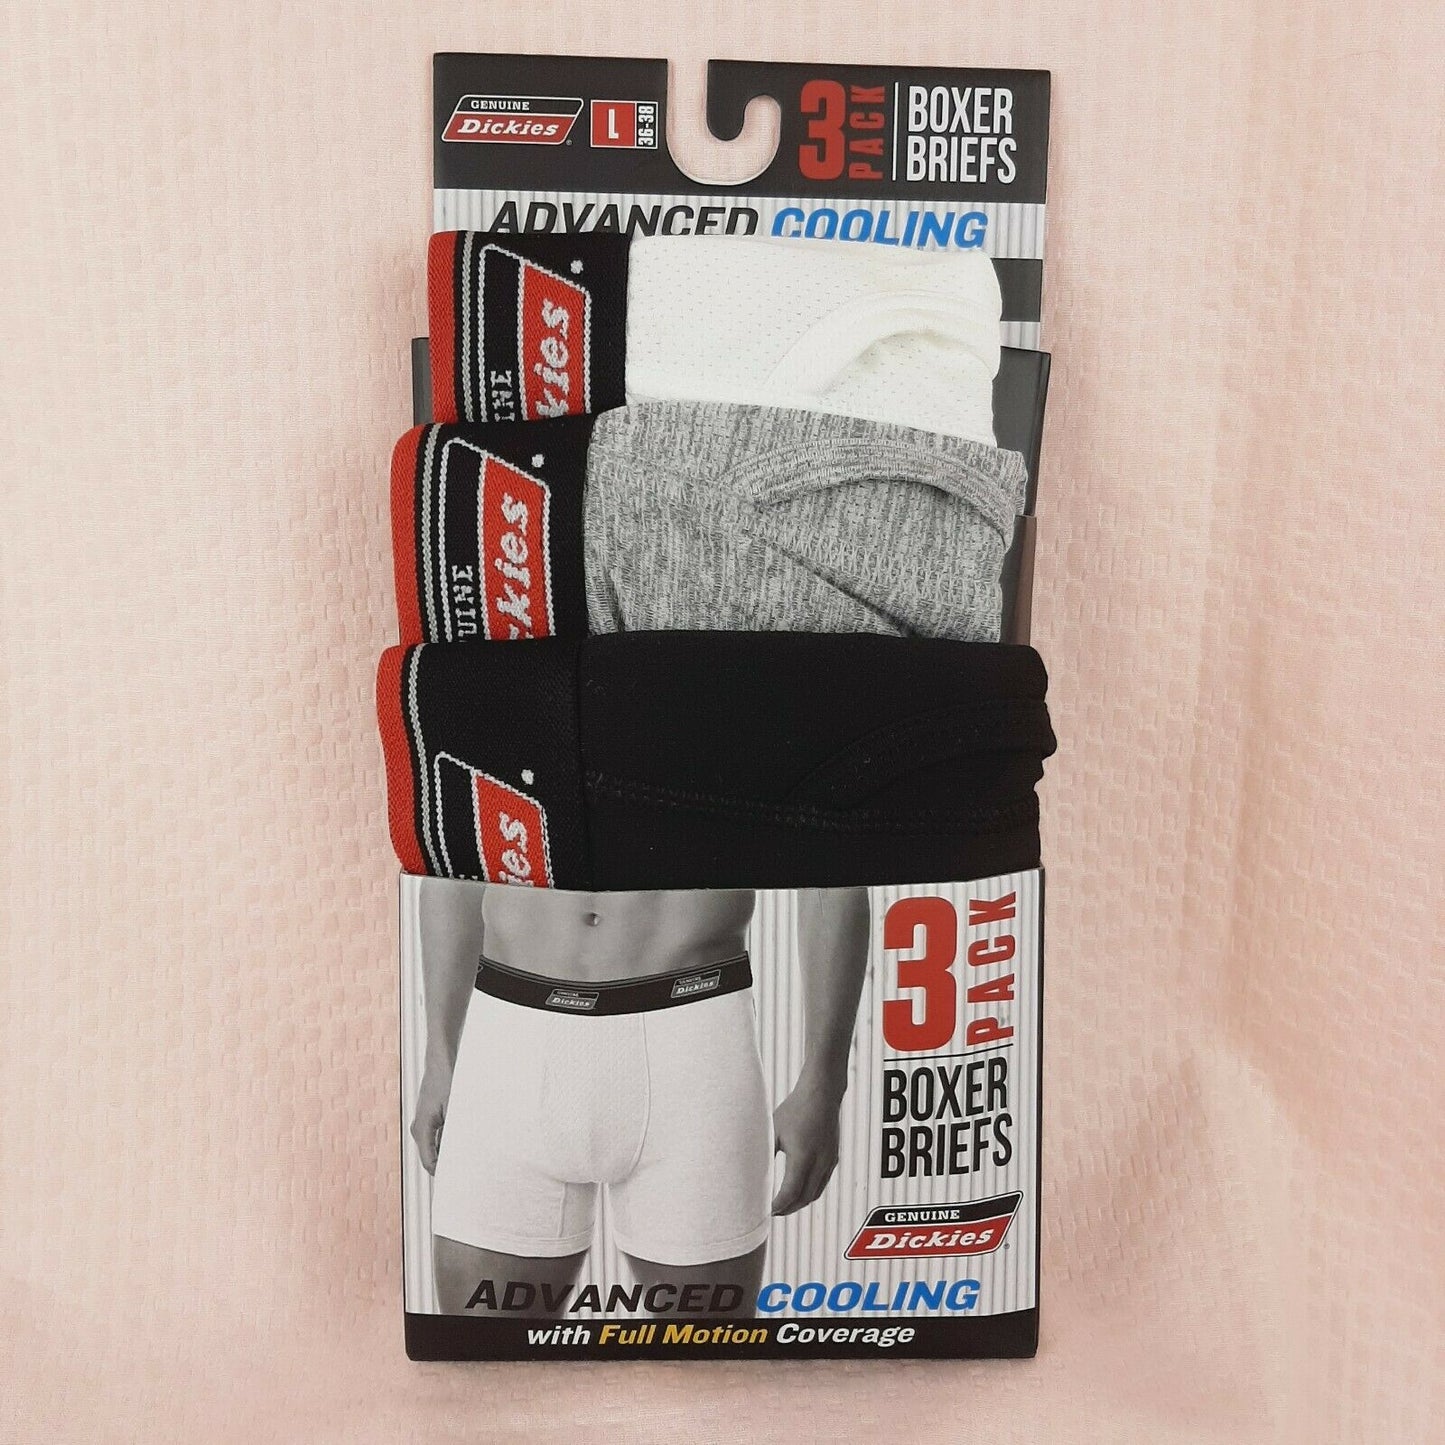 Dickies Advance Cooling Boxer Briefs